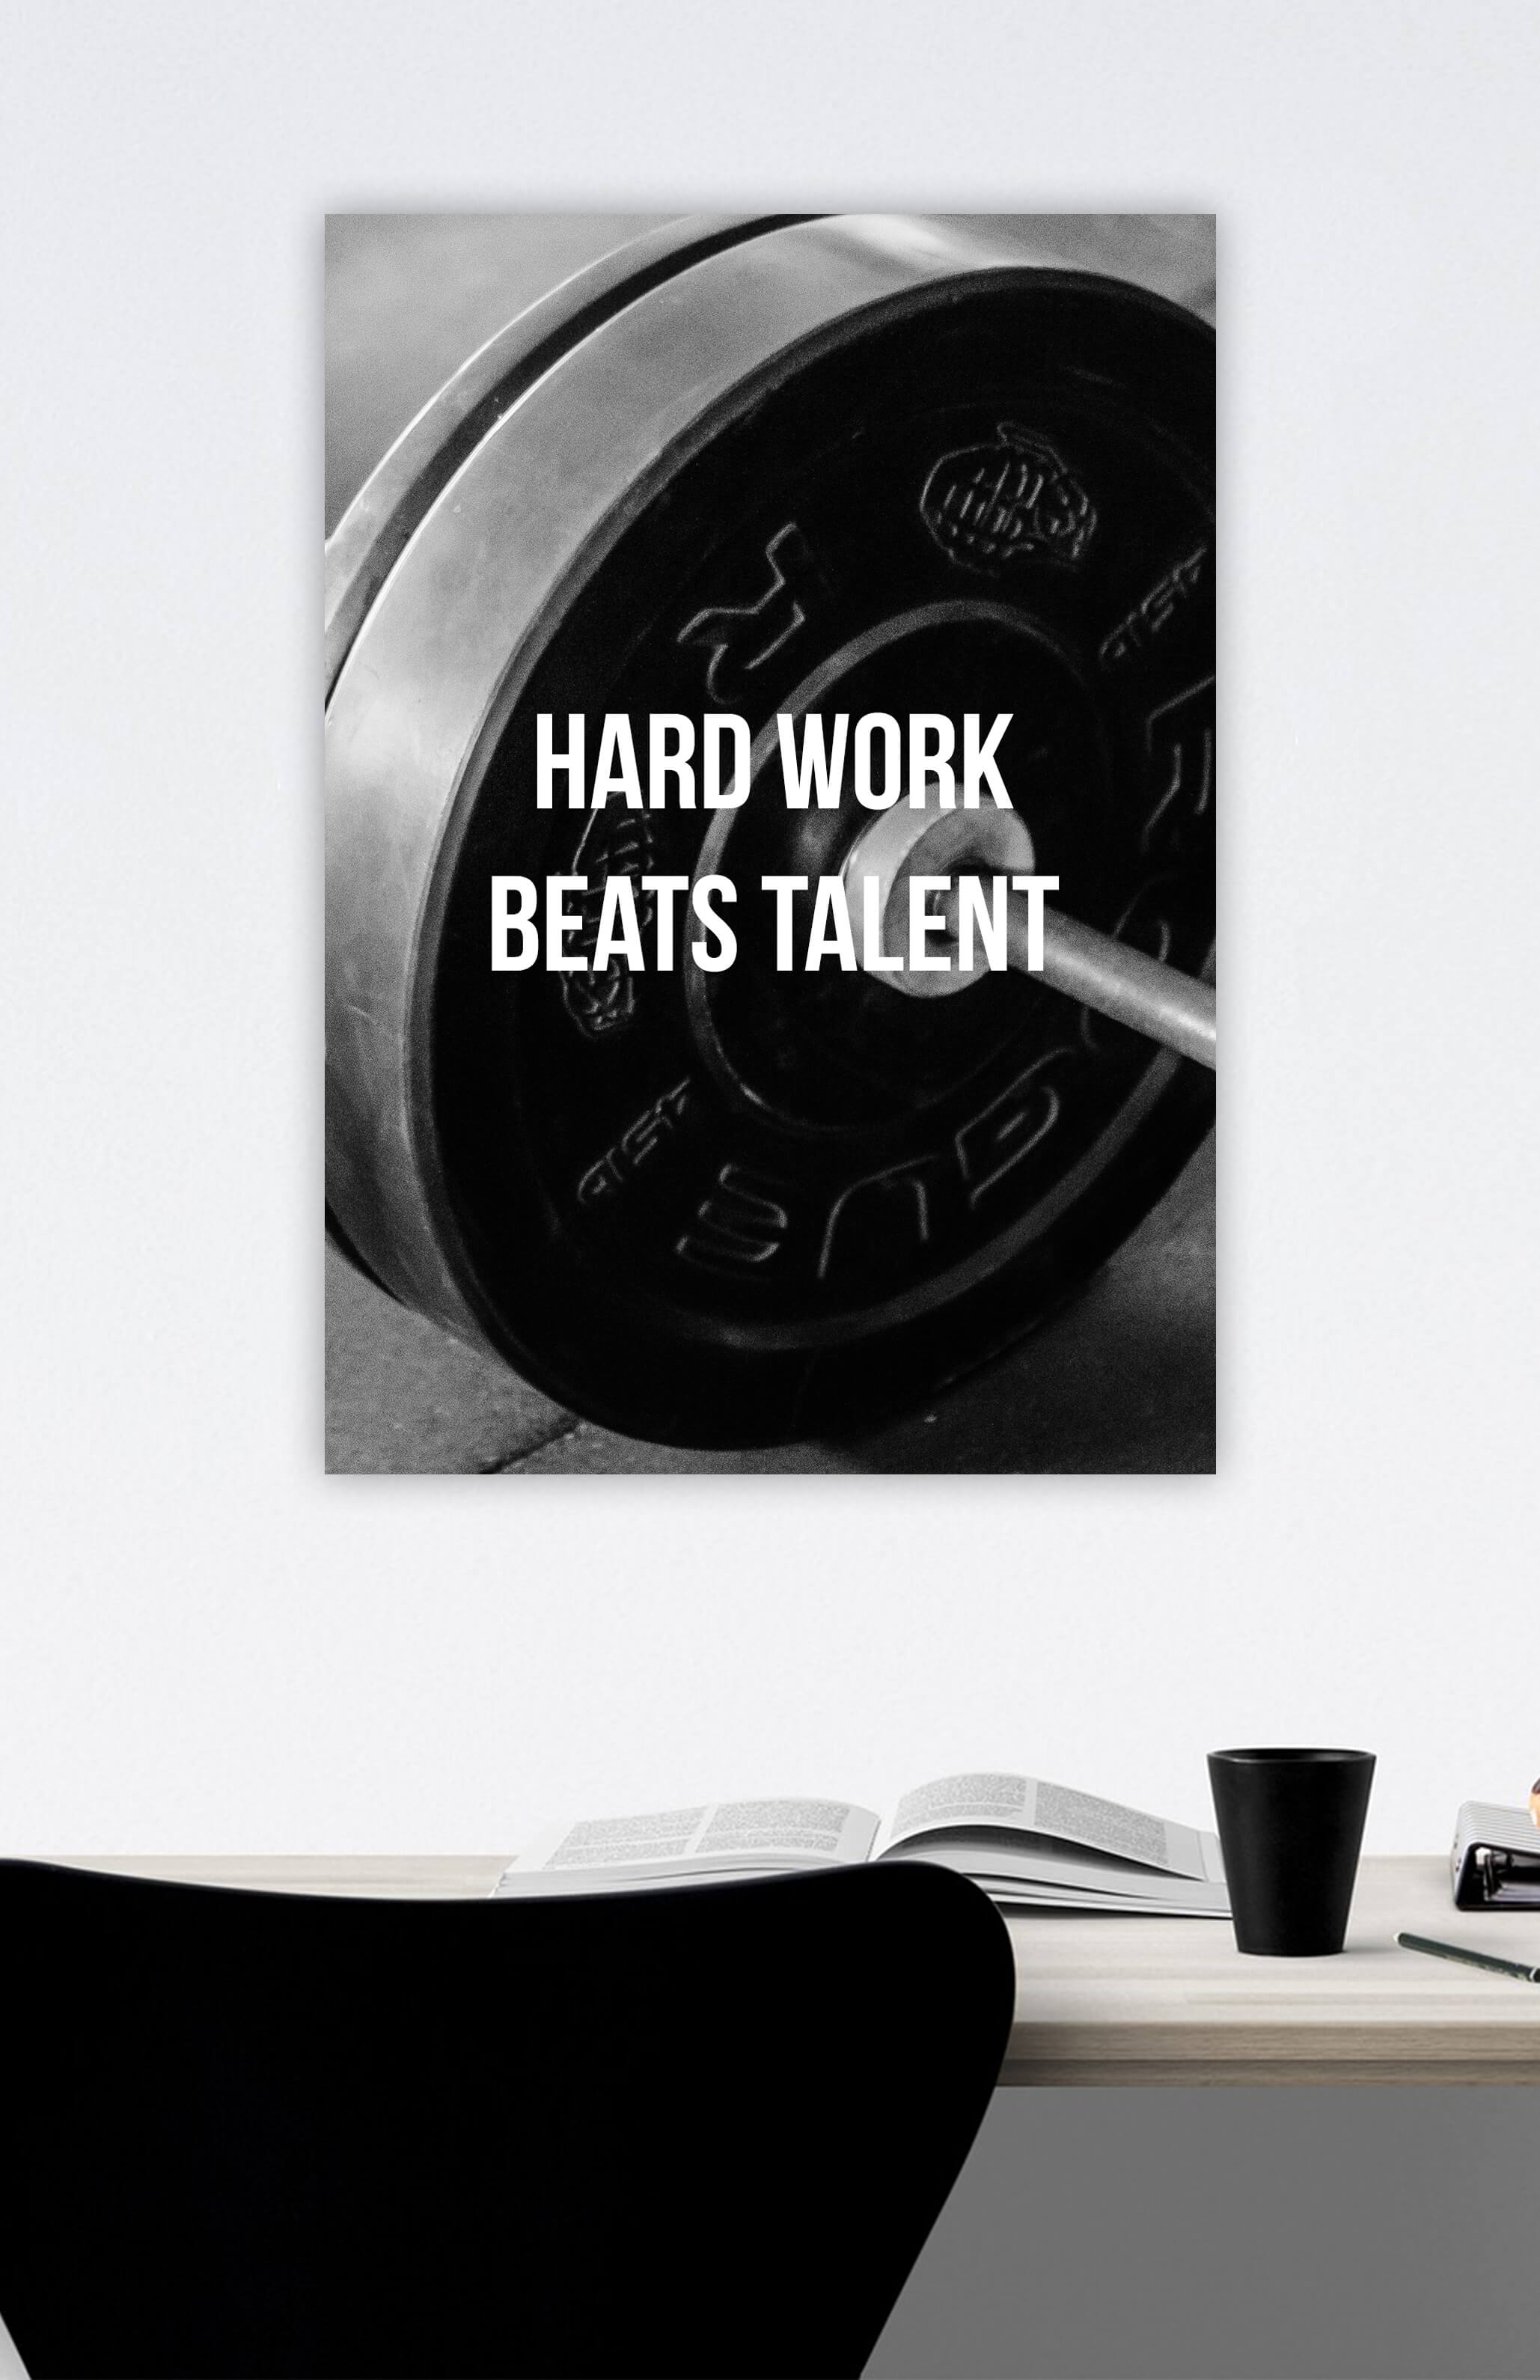 V3 Apparel womens hard work beats talent, Motivational posters, mens inspirational wall artwork and empowering poster quote designs for office, home gym, school, kitchen and living room.